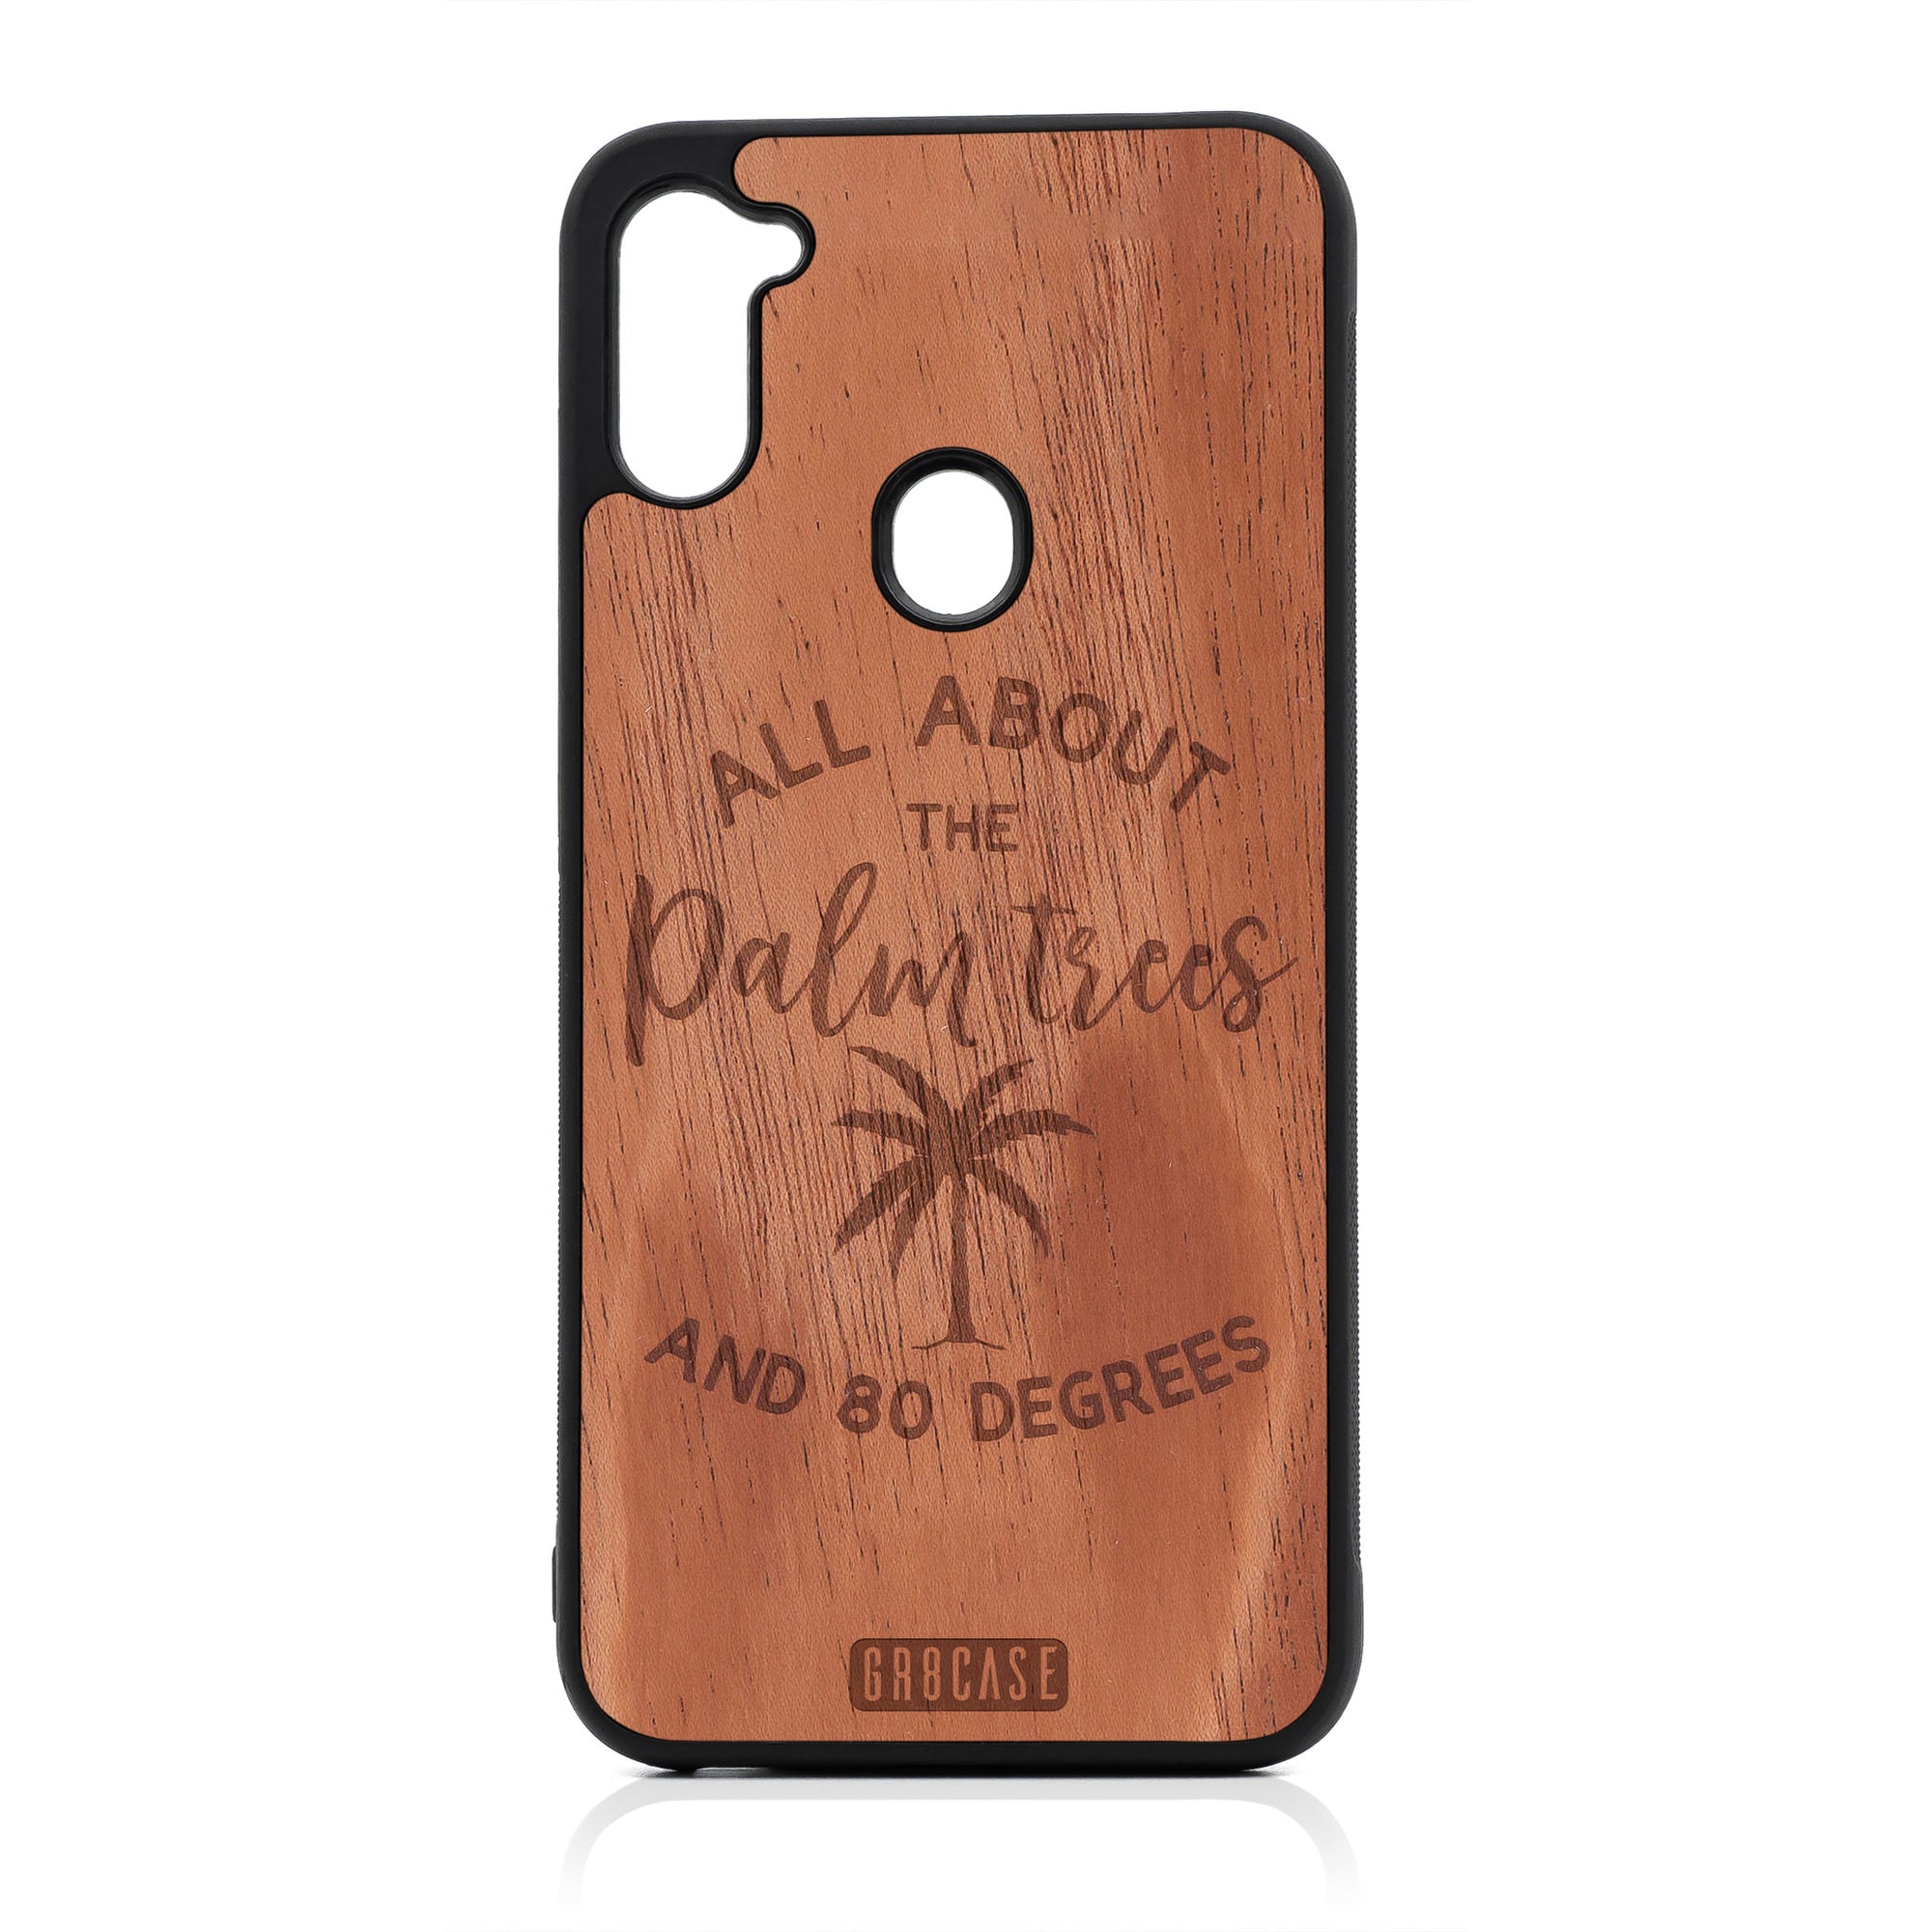 All About The Palm Trees And 80 Degrees Design Wood Case For Samsung Galaxy A11